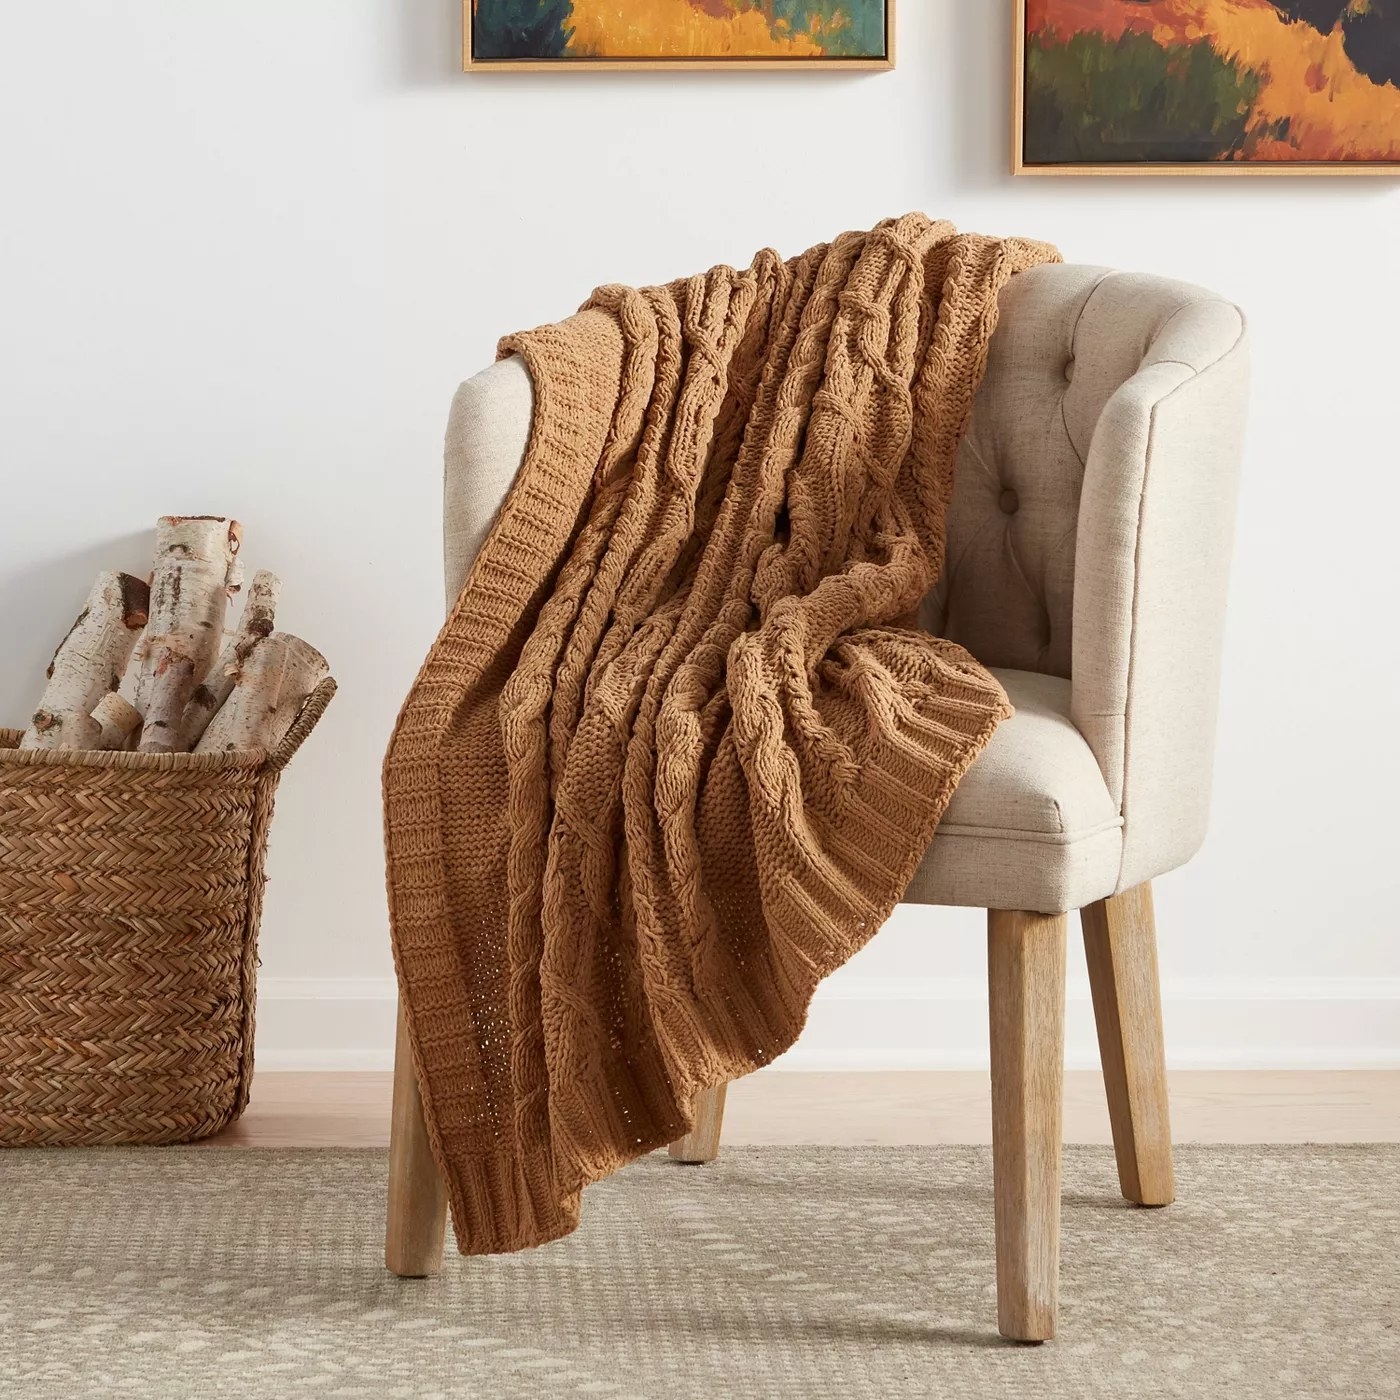 The tan knit throw resting on a chair